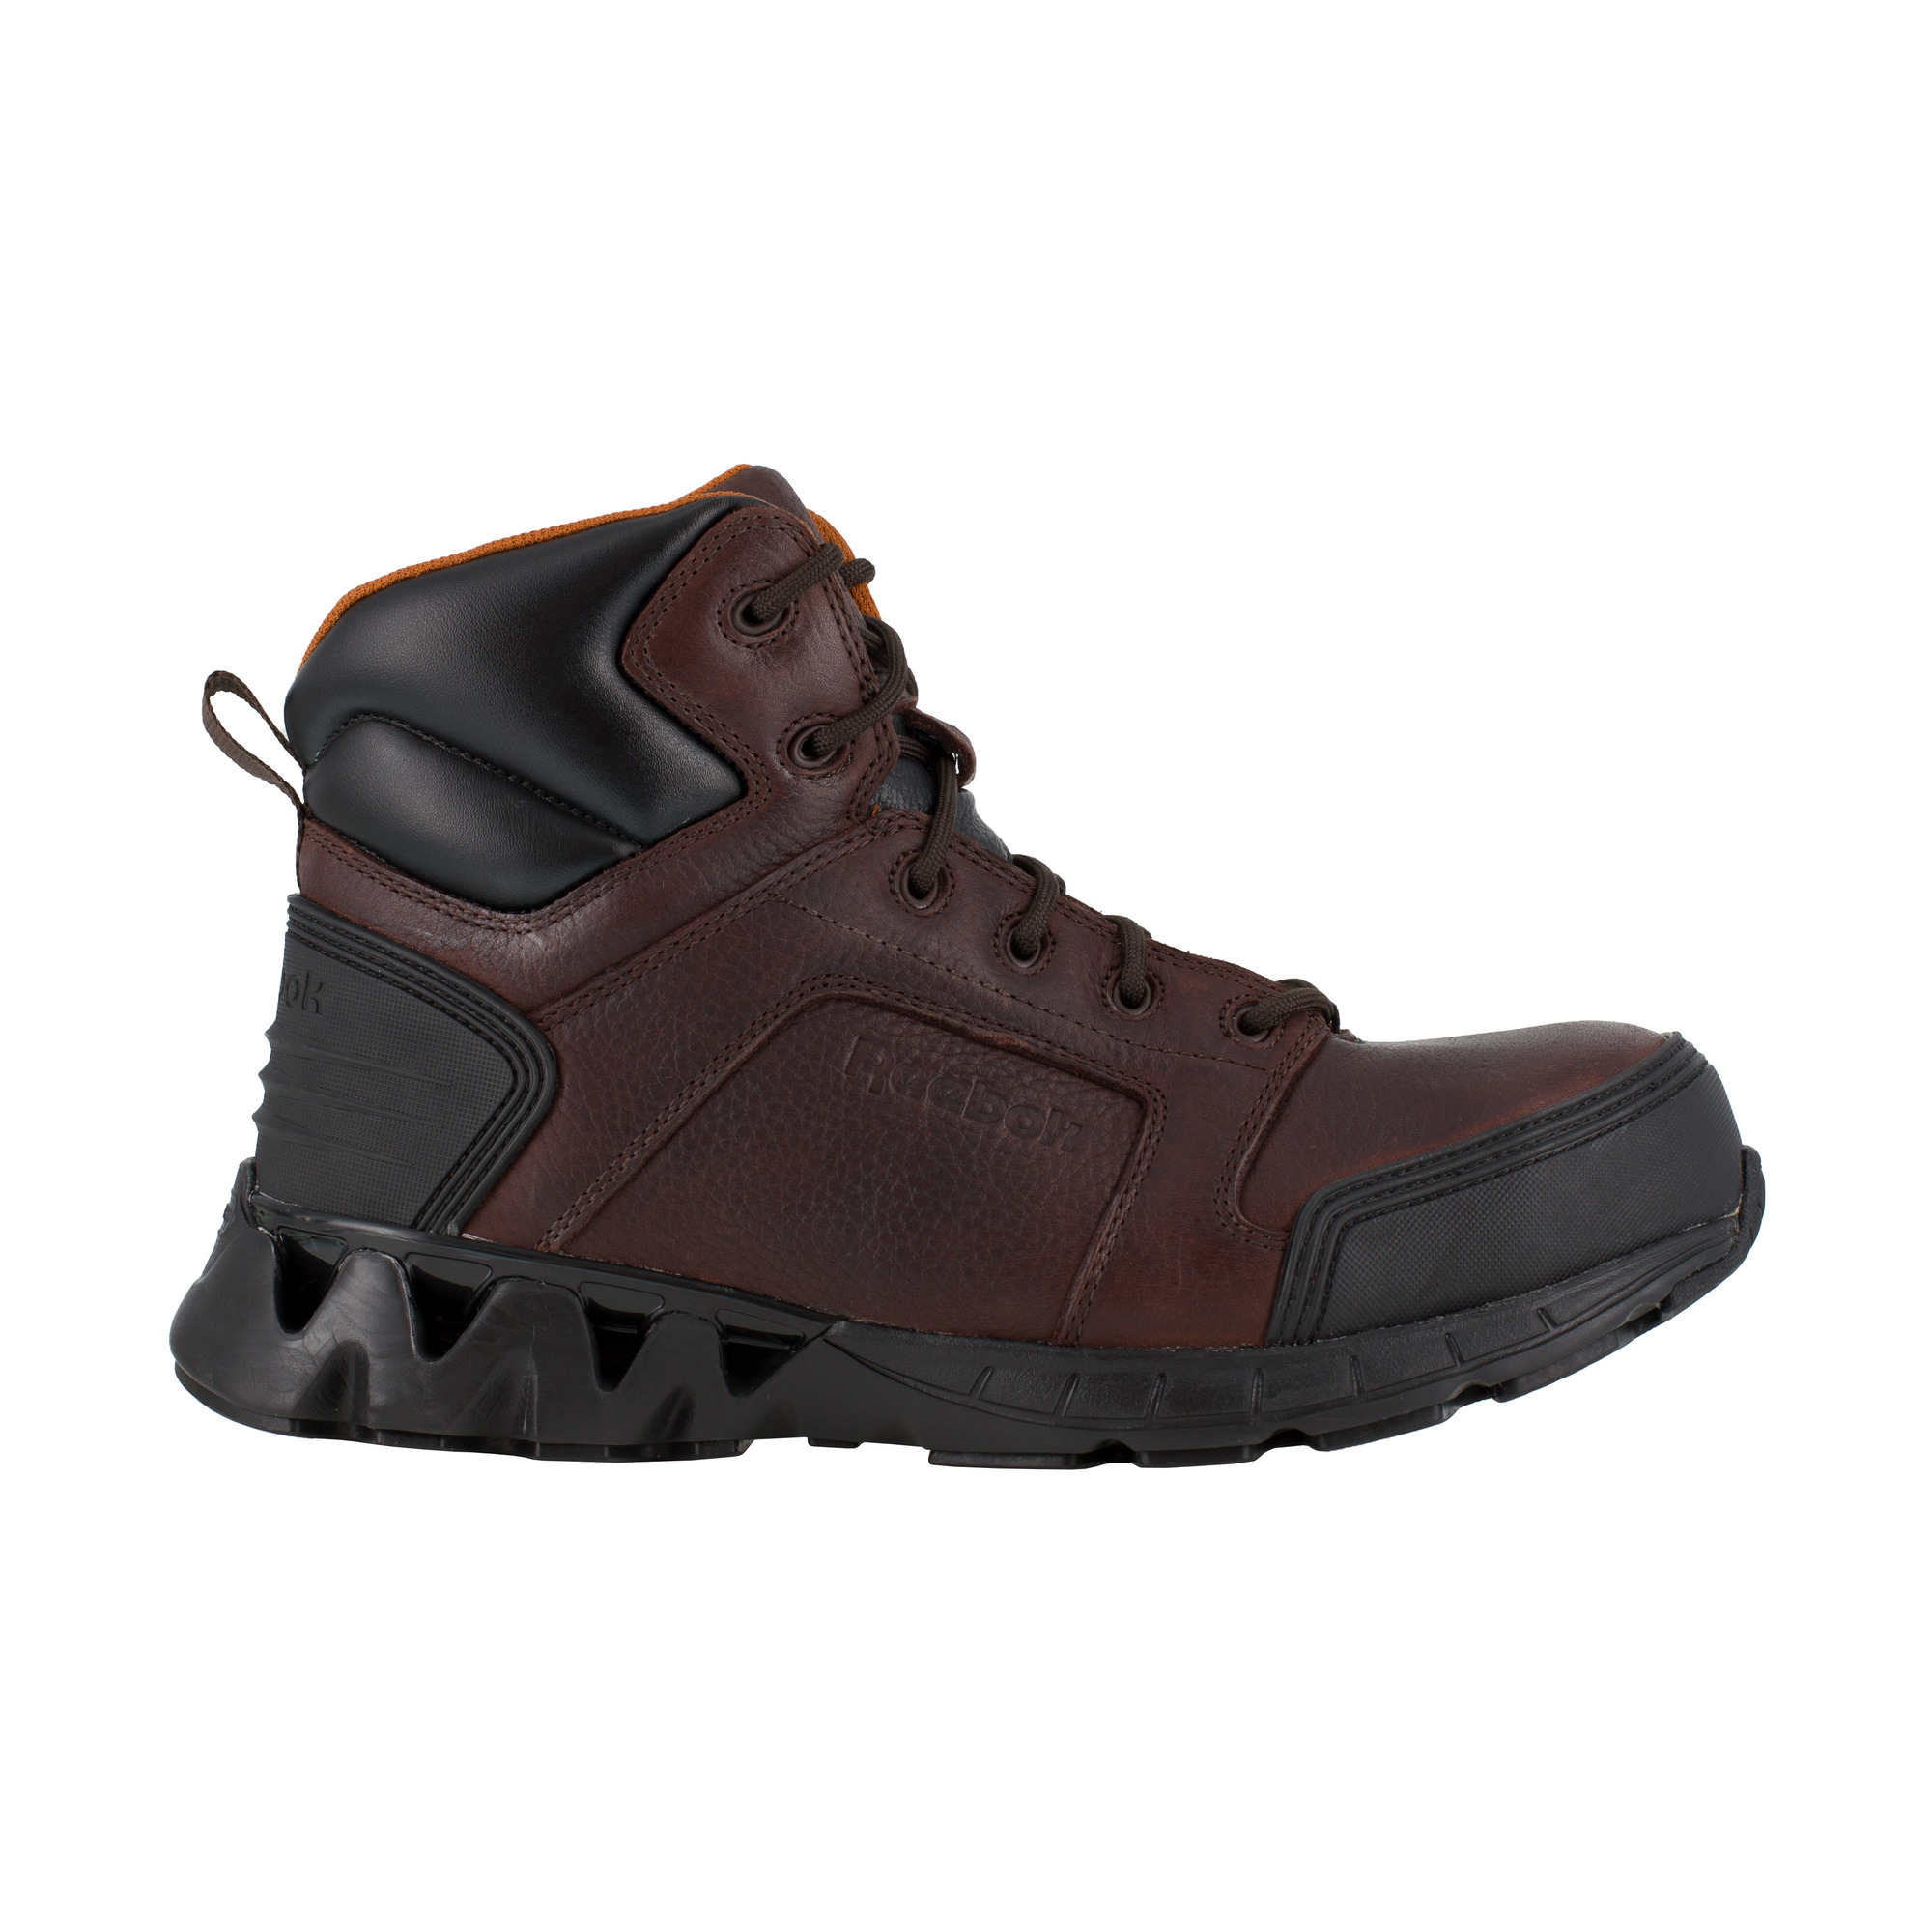 Reebok, 6Inch Athletic Work Boot, Size 8, Width Wide, Color Dark Brown, Model RB7005 -  RB7005-W-08.0